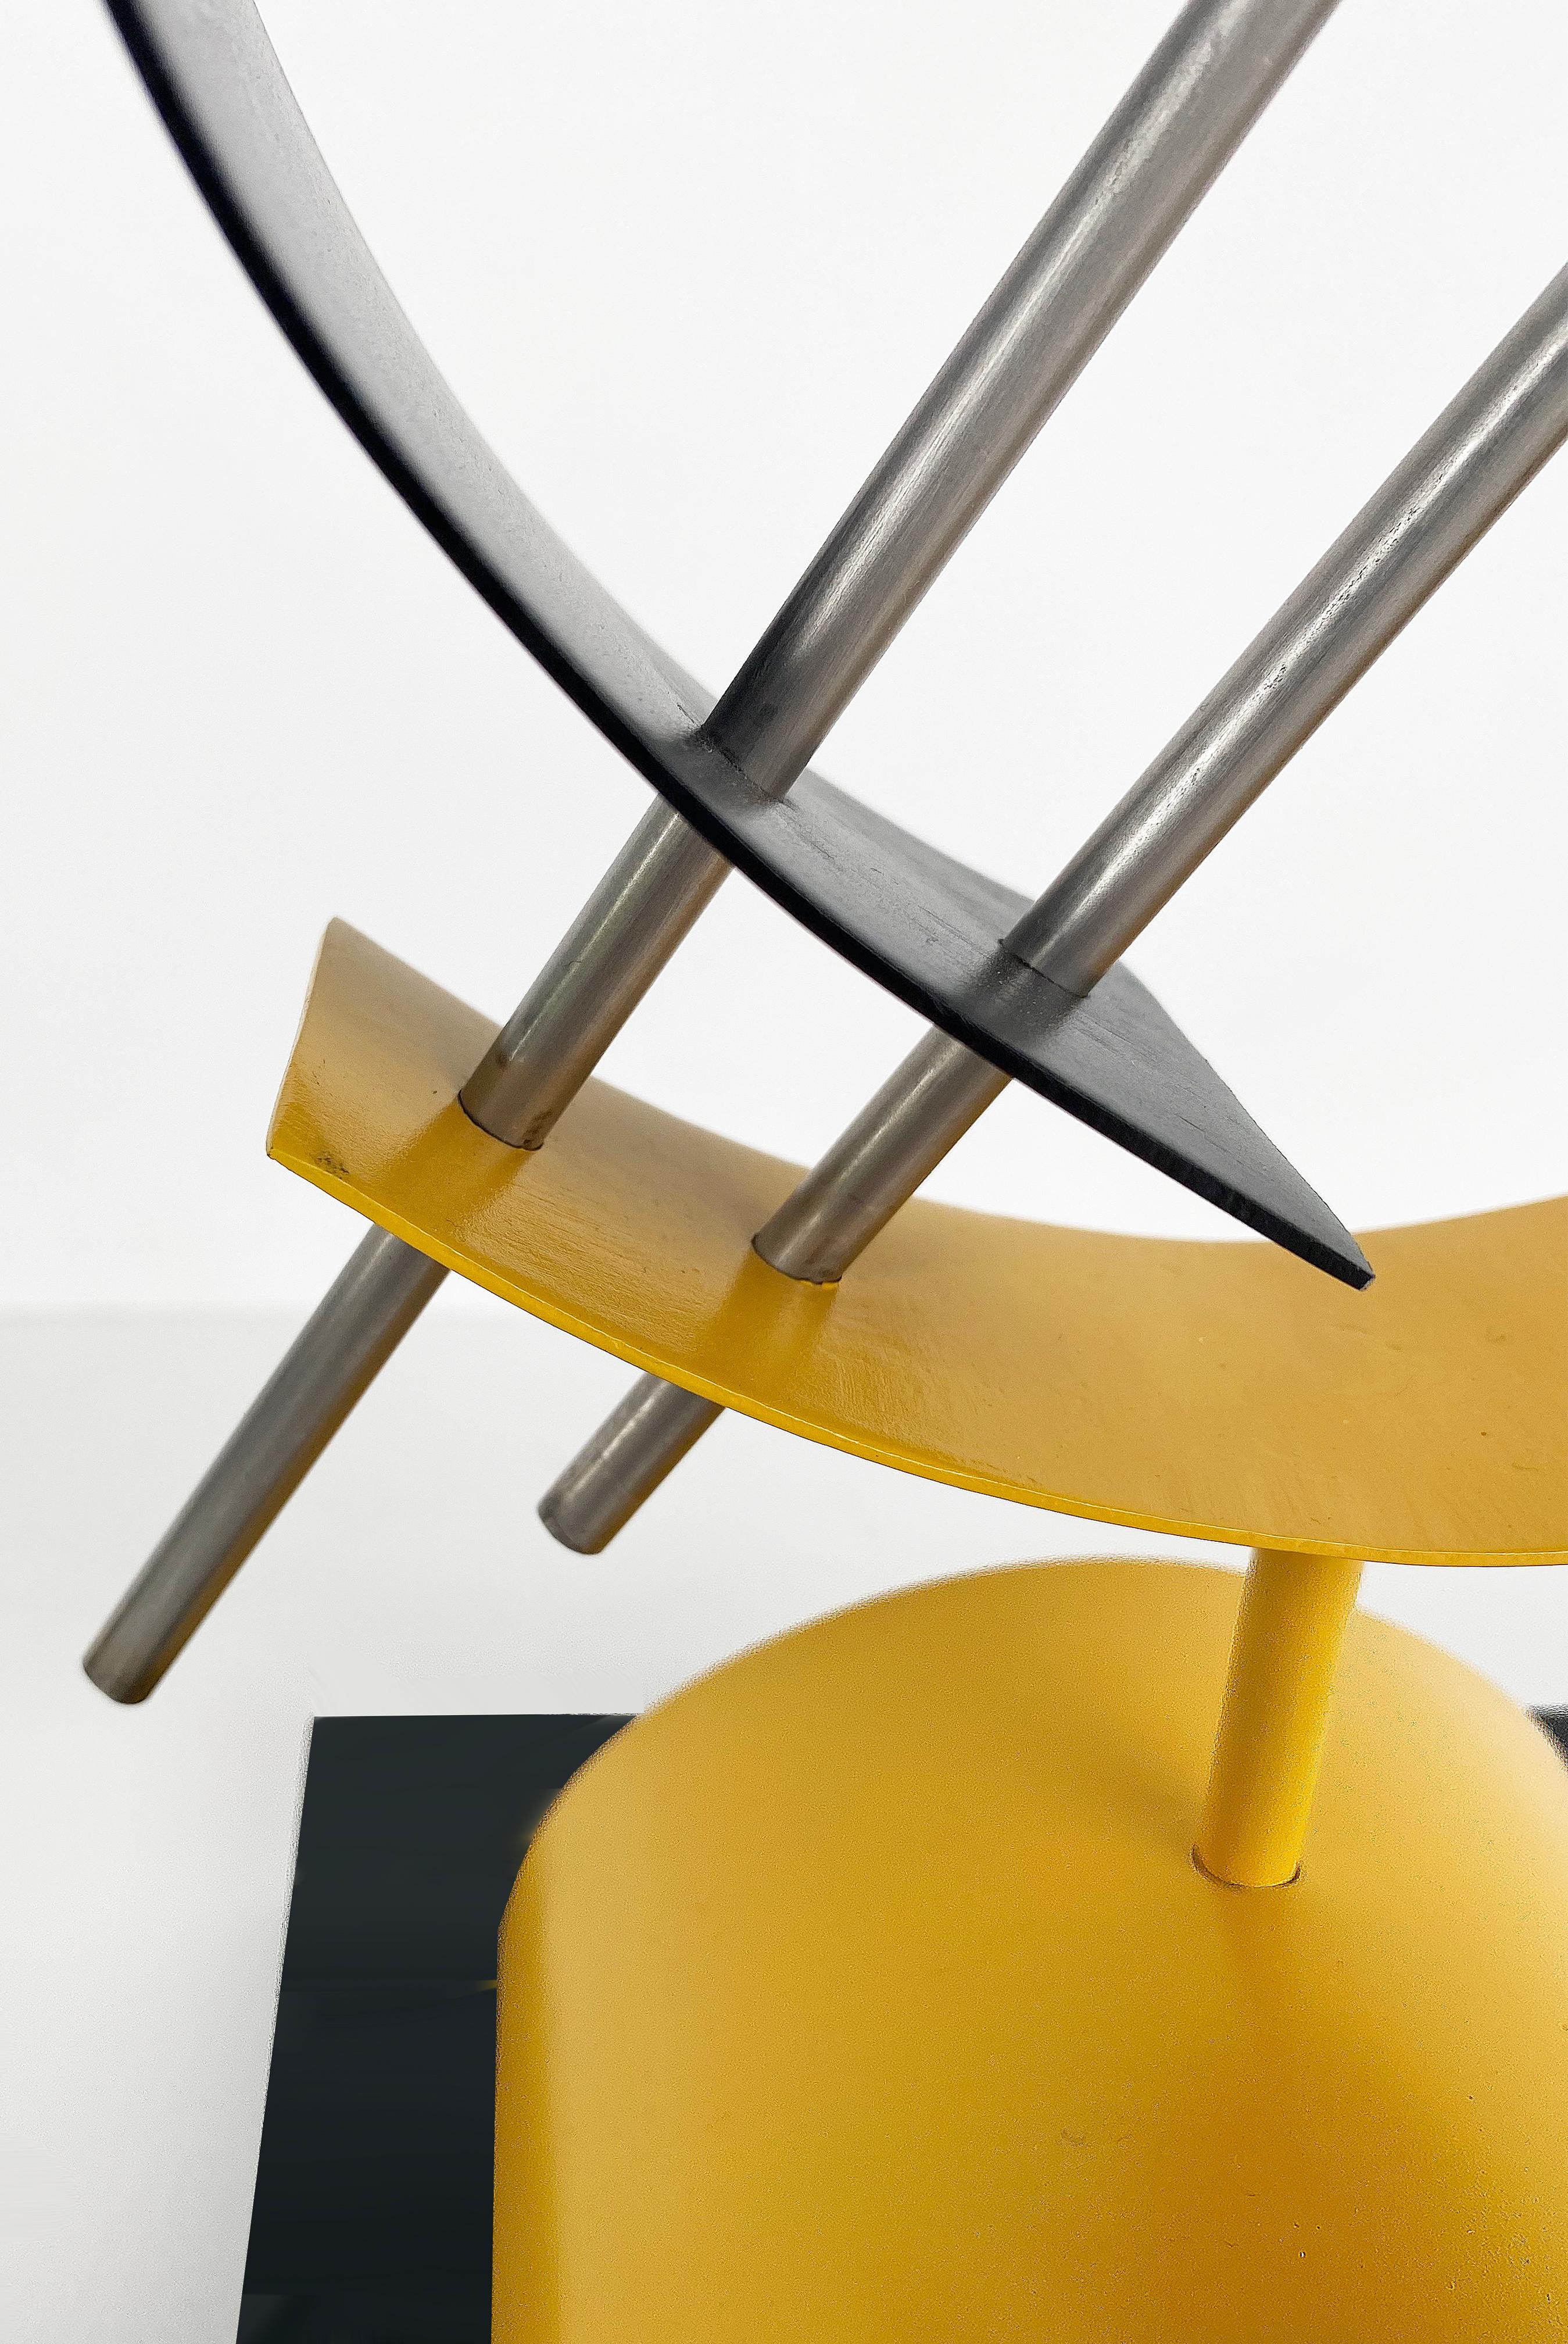 Post-Modern Geometric Abstract Metal Table Sculpture 4